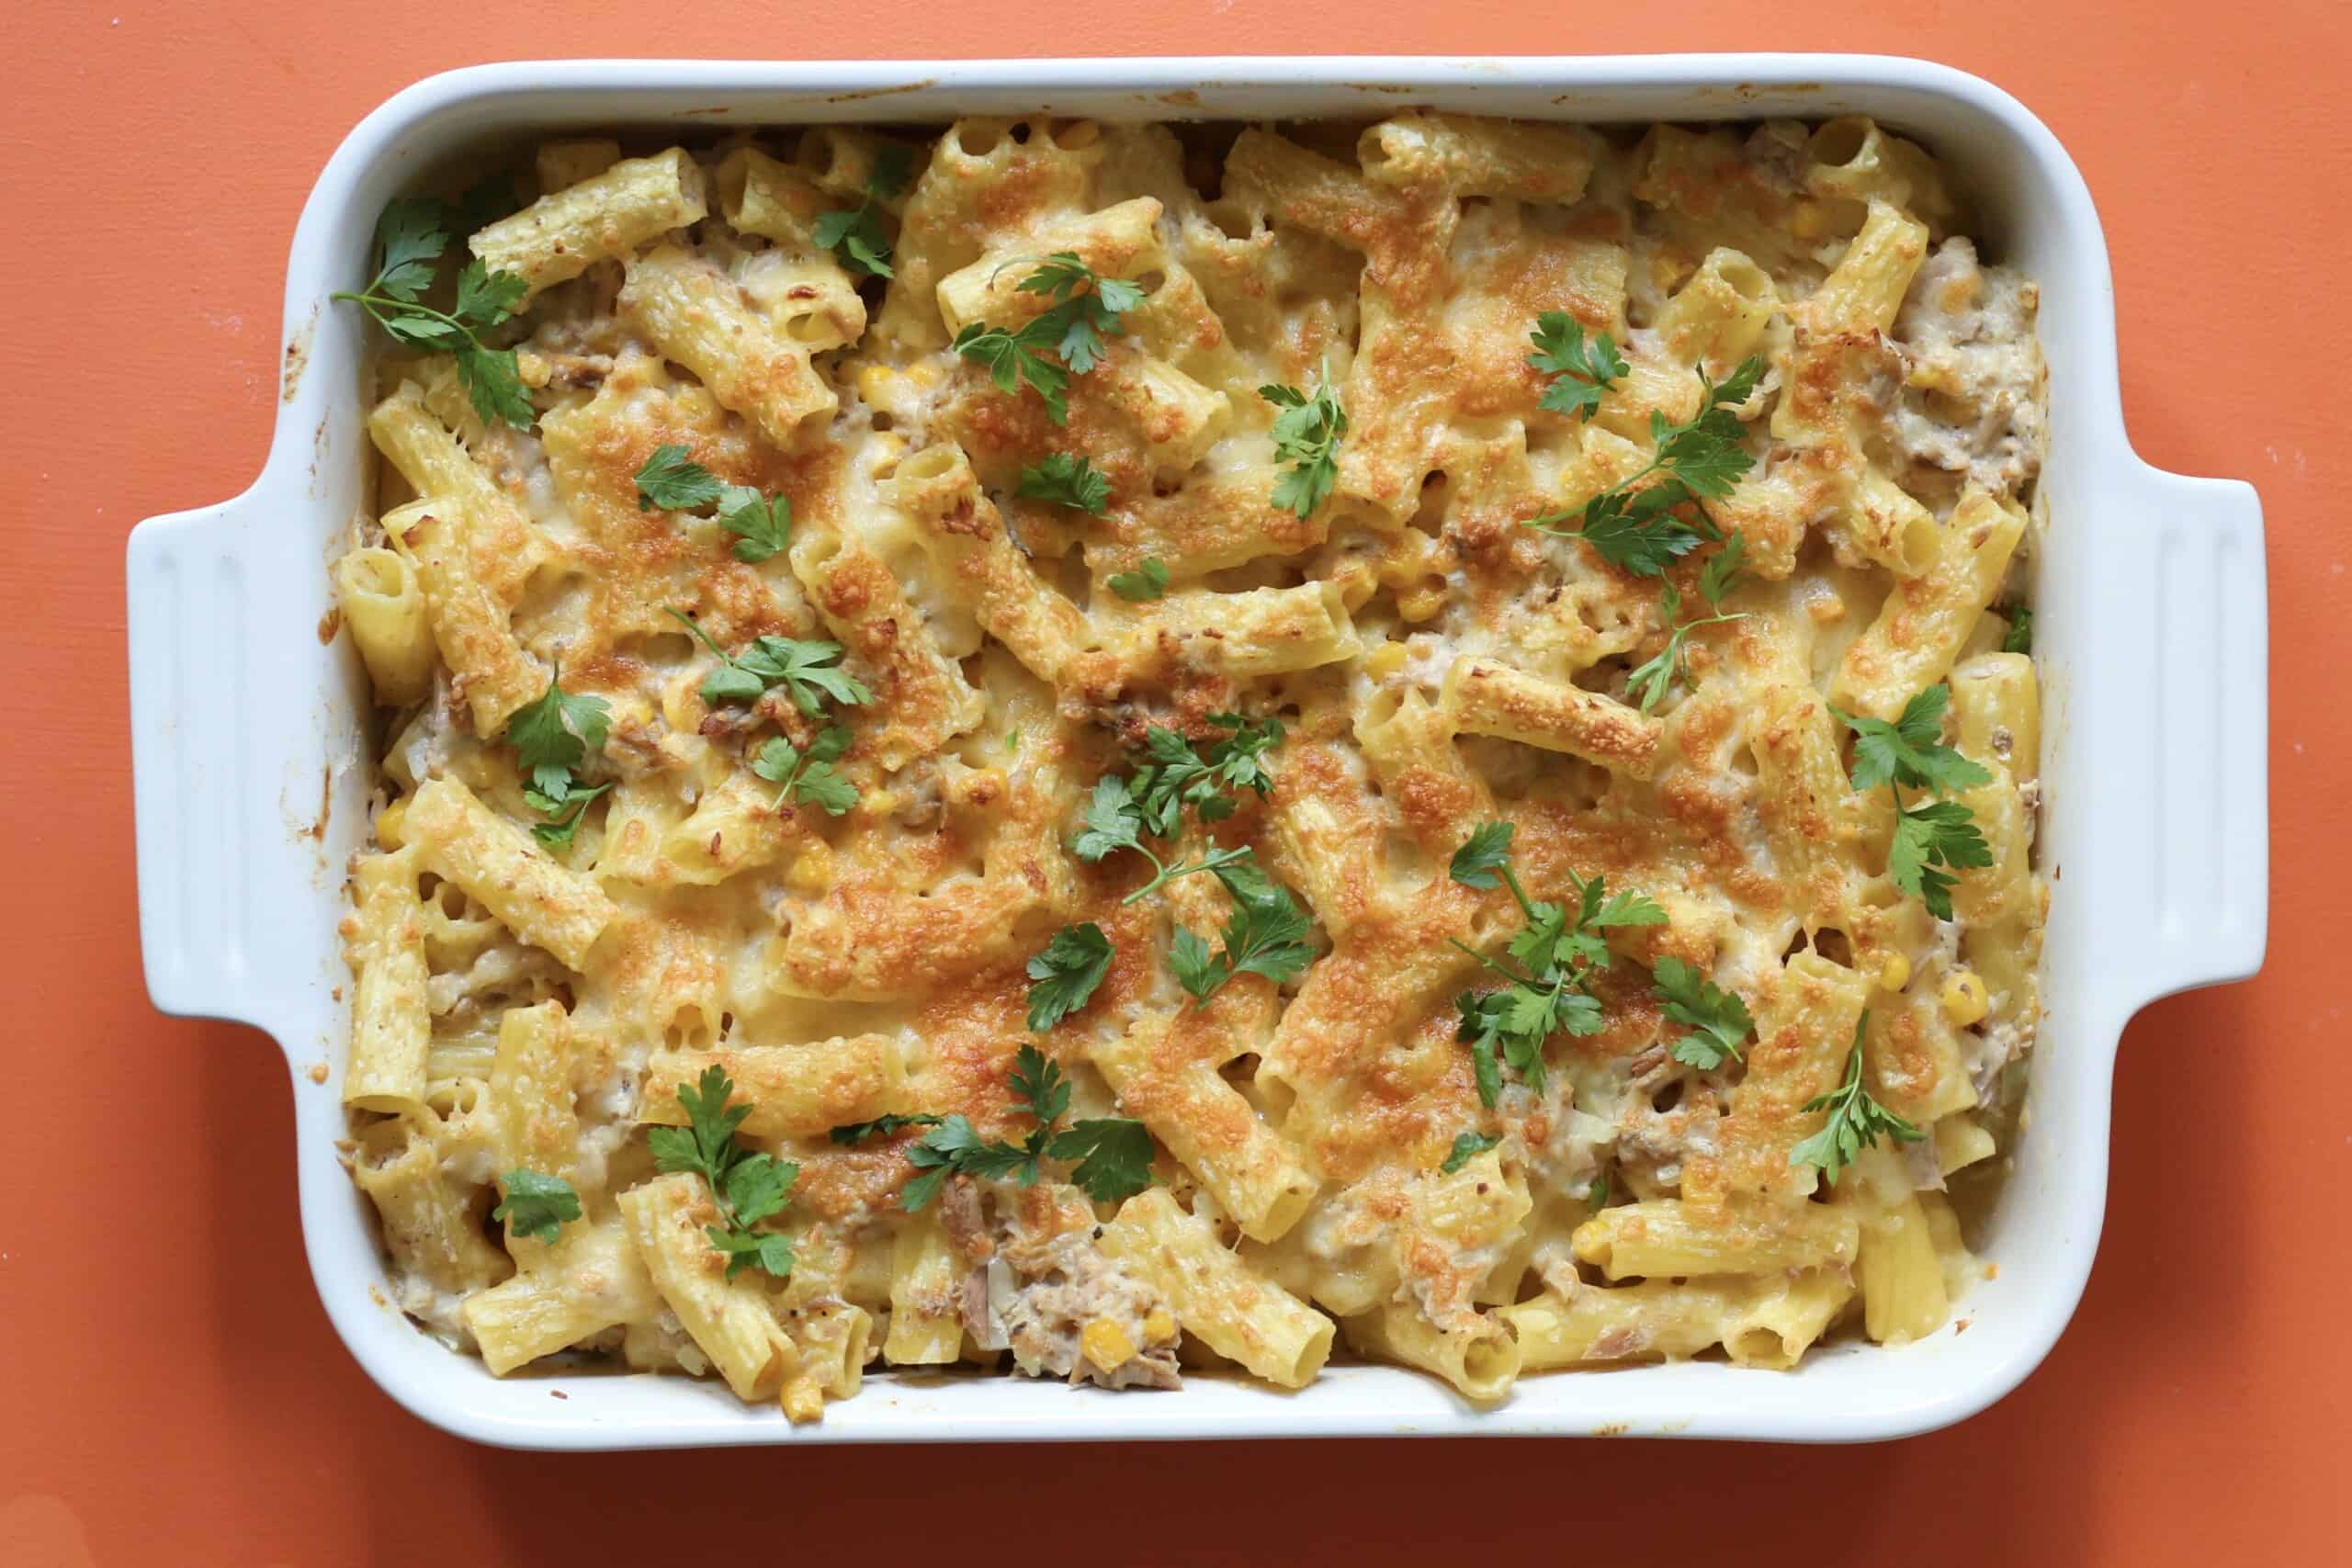 Tuna bake bake browned in the oven in a rectangular white dish topped with fresh parsley on an orange background.